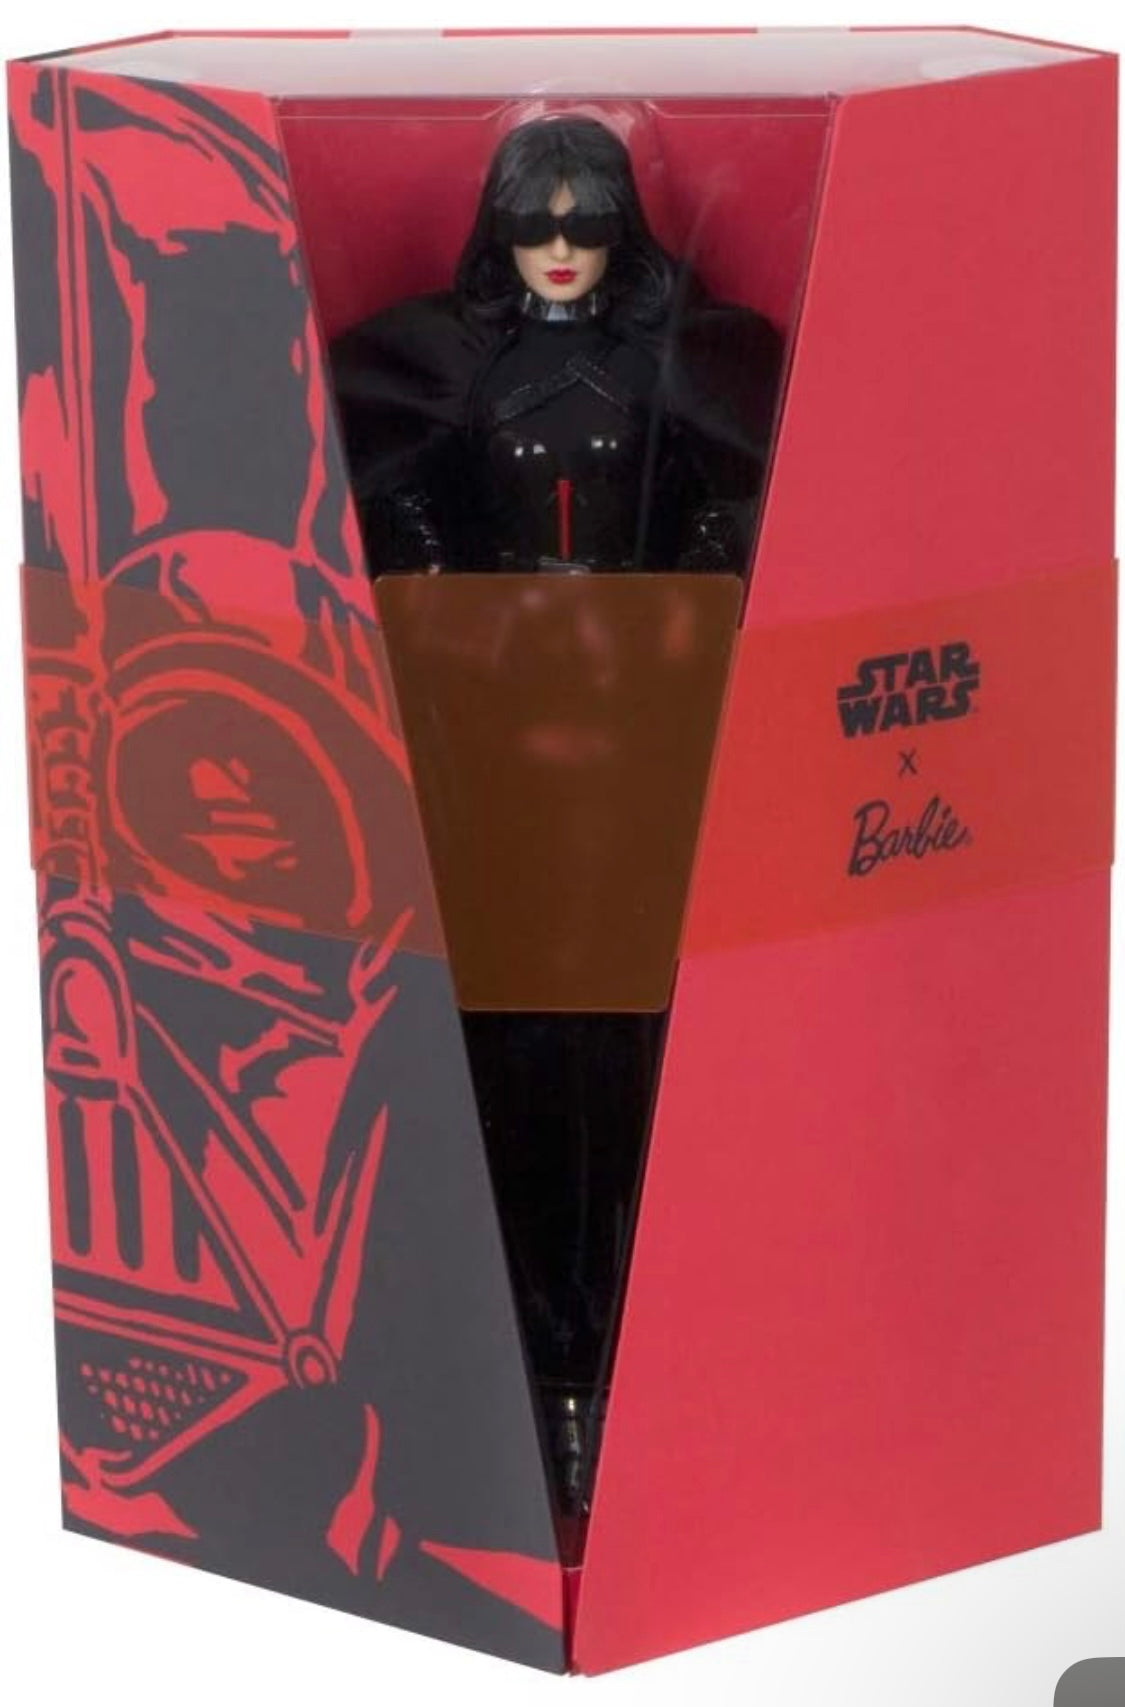 Barbie Collector Star Wars Darth Vader x Barbie Doll, 11.5-inch Wearing Black Peplum Top, Cape and Skirt, with Doll Stand and Certificate of Authenticity